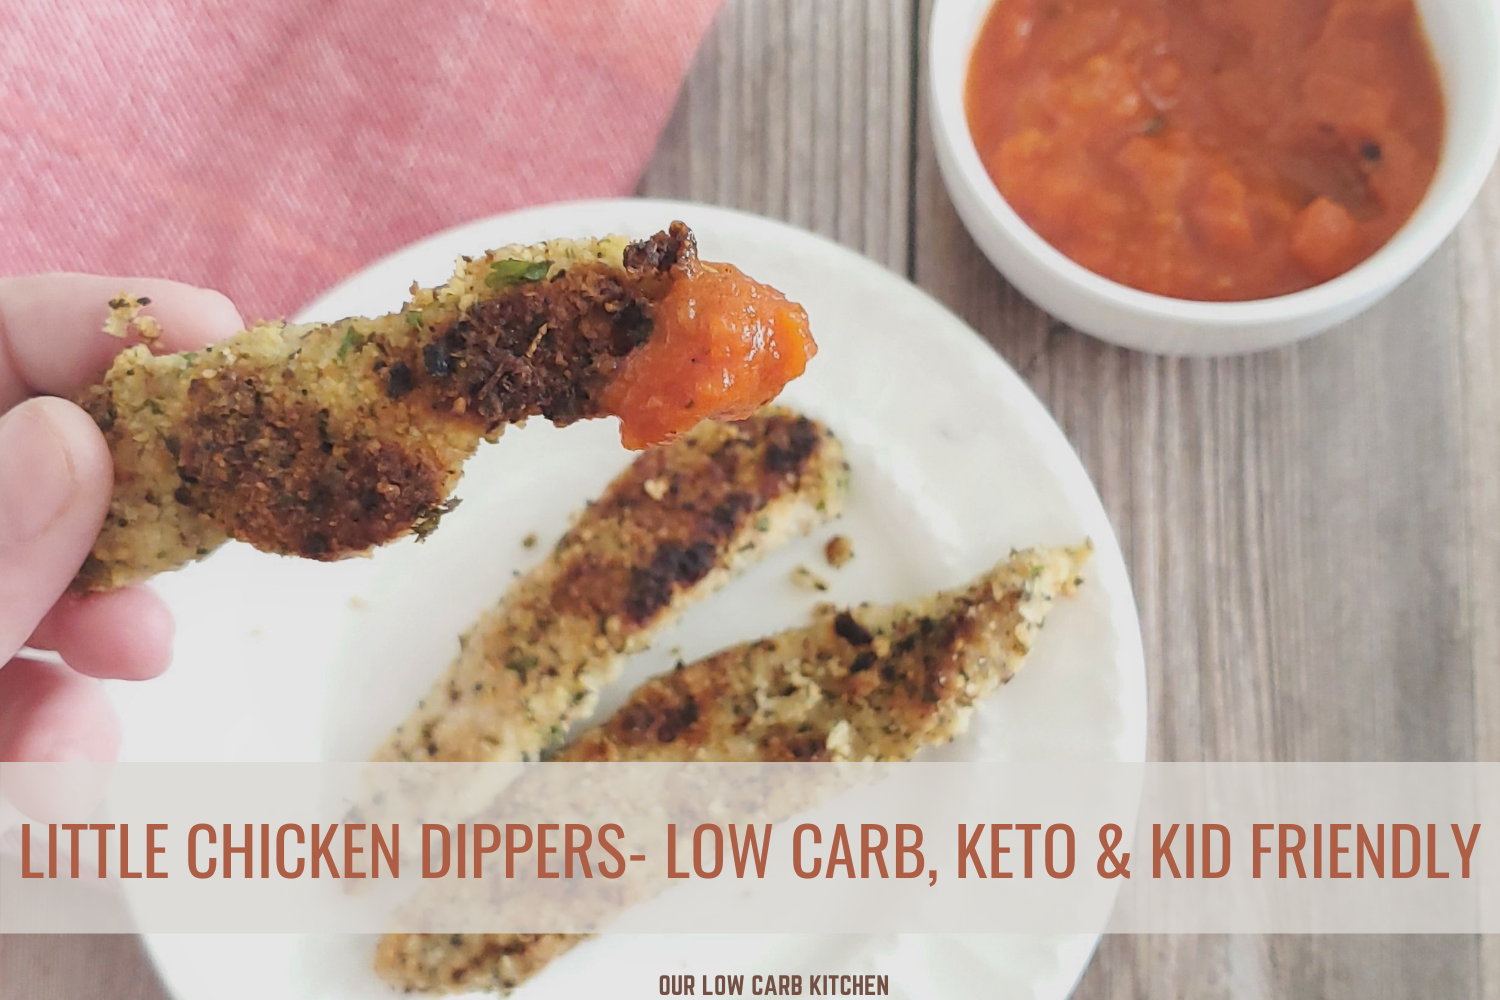 LOW CARB KID FRIENDLY DINNERS